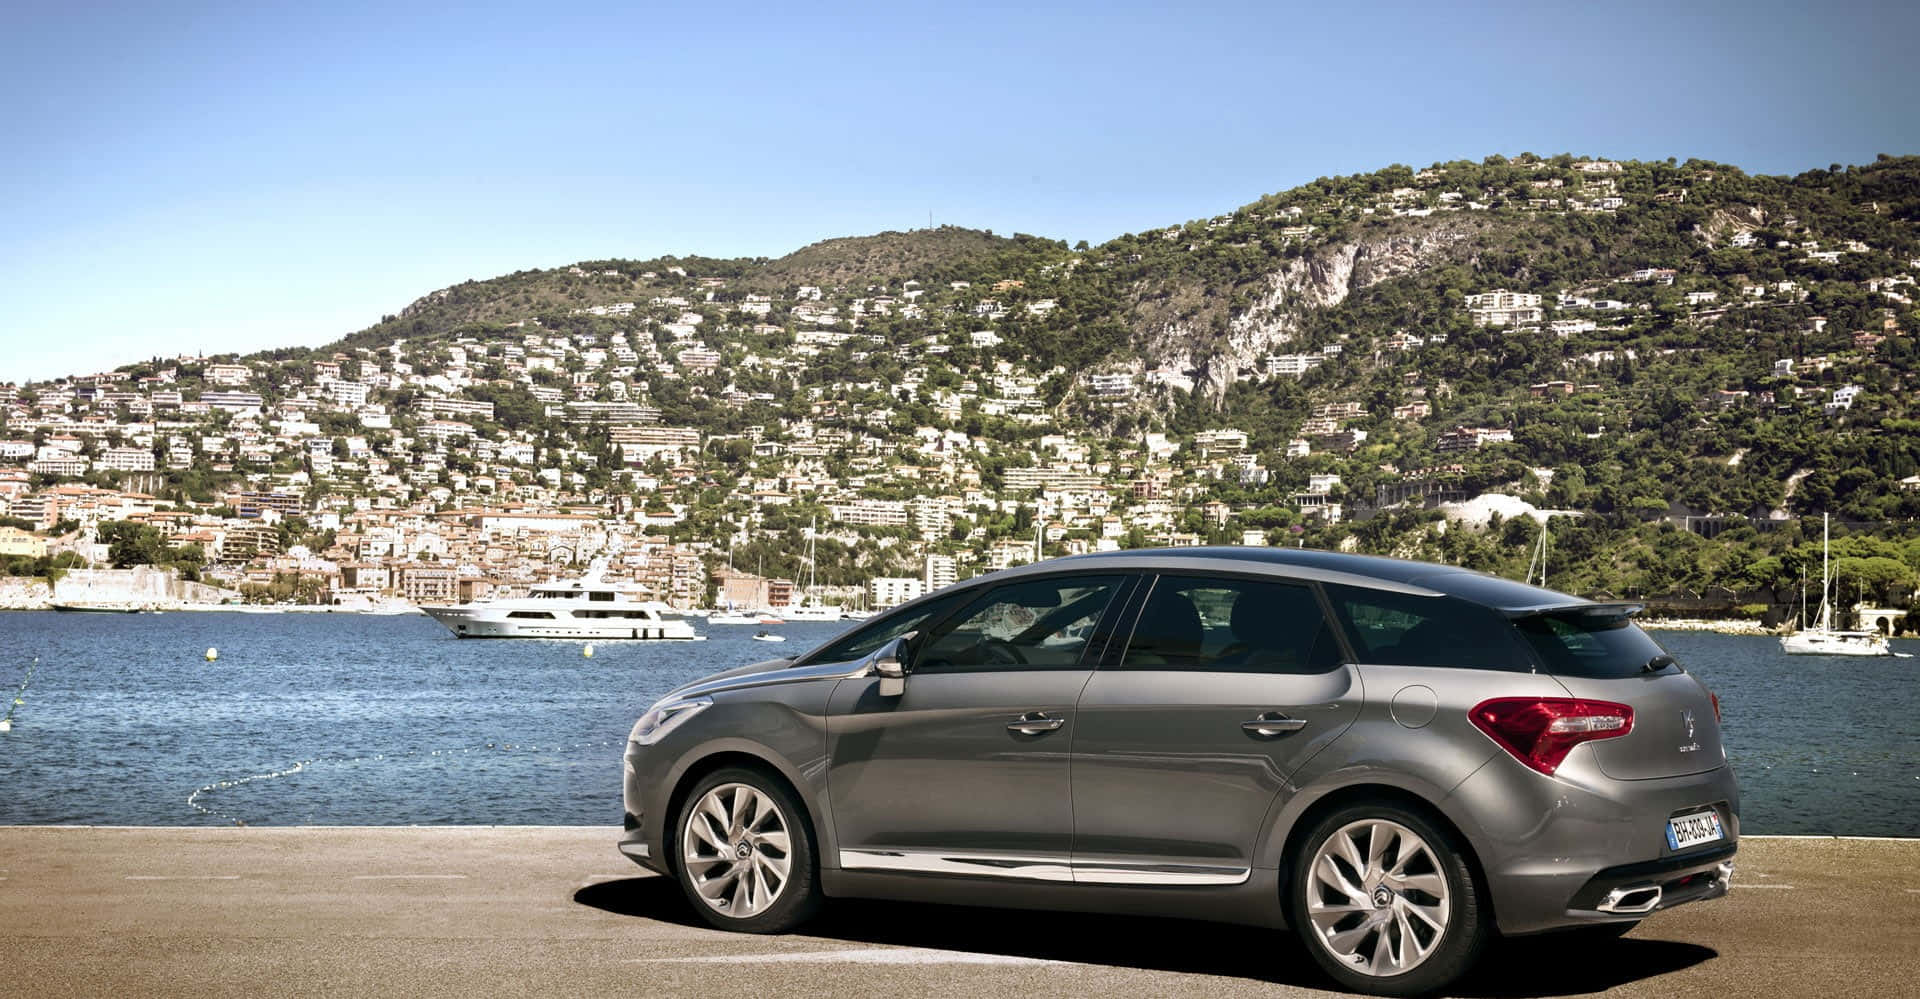 "the Sleek And Stylish Citroen Ds5 - The Epitome Of French Car Elegance" Wallpaper